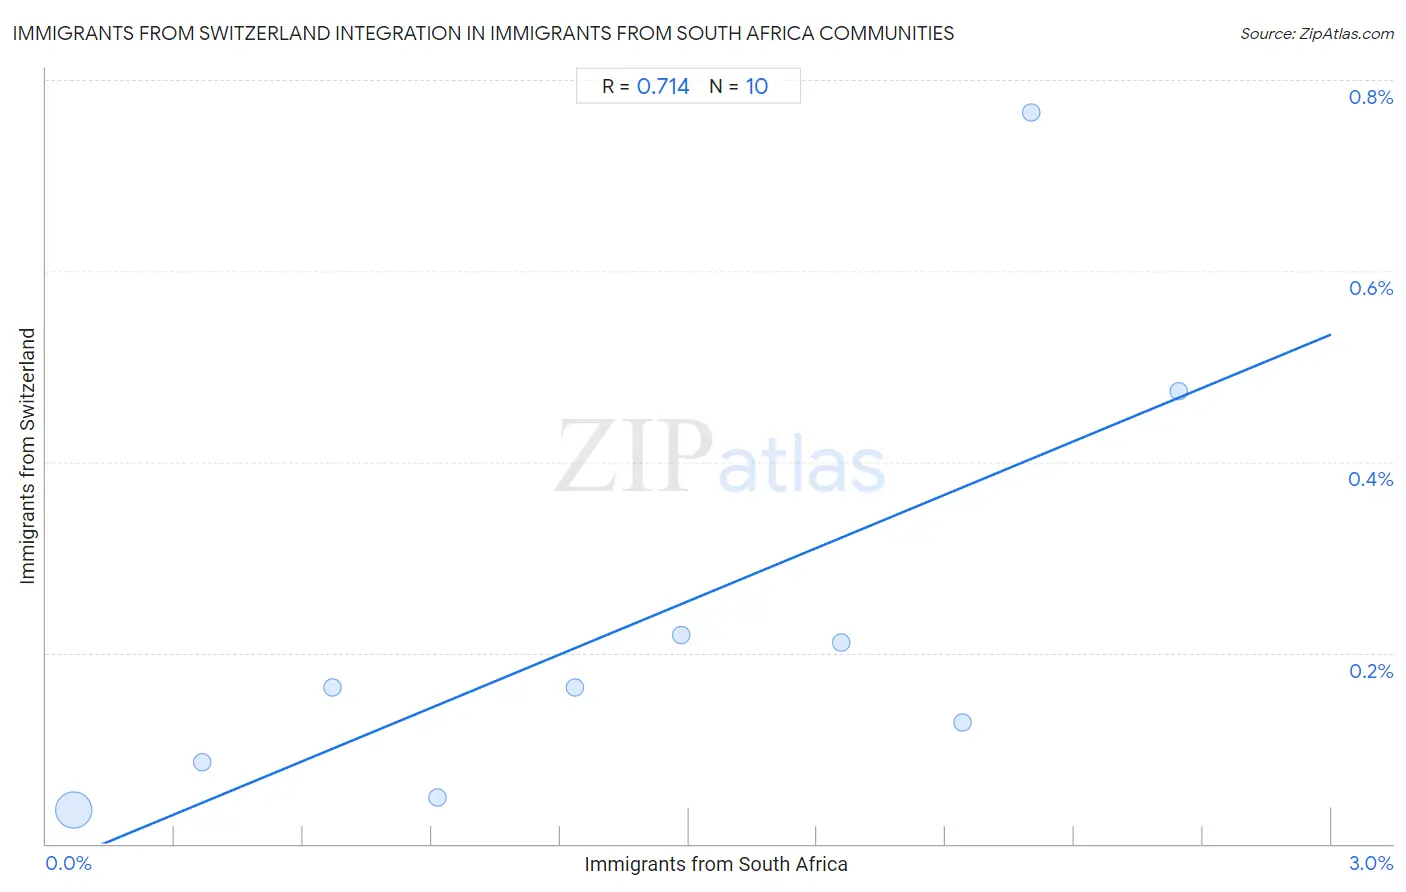 Immigrants from South Africa Integration in Immigrants from Switzerland Communities